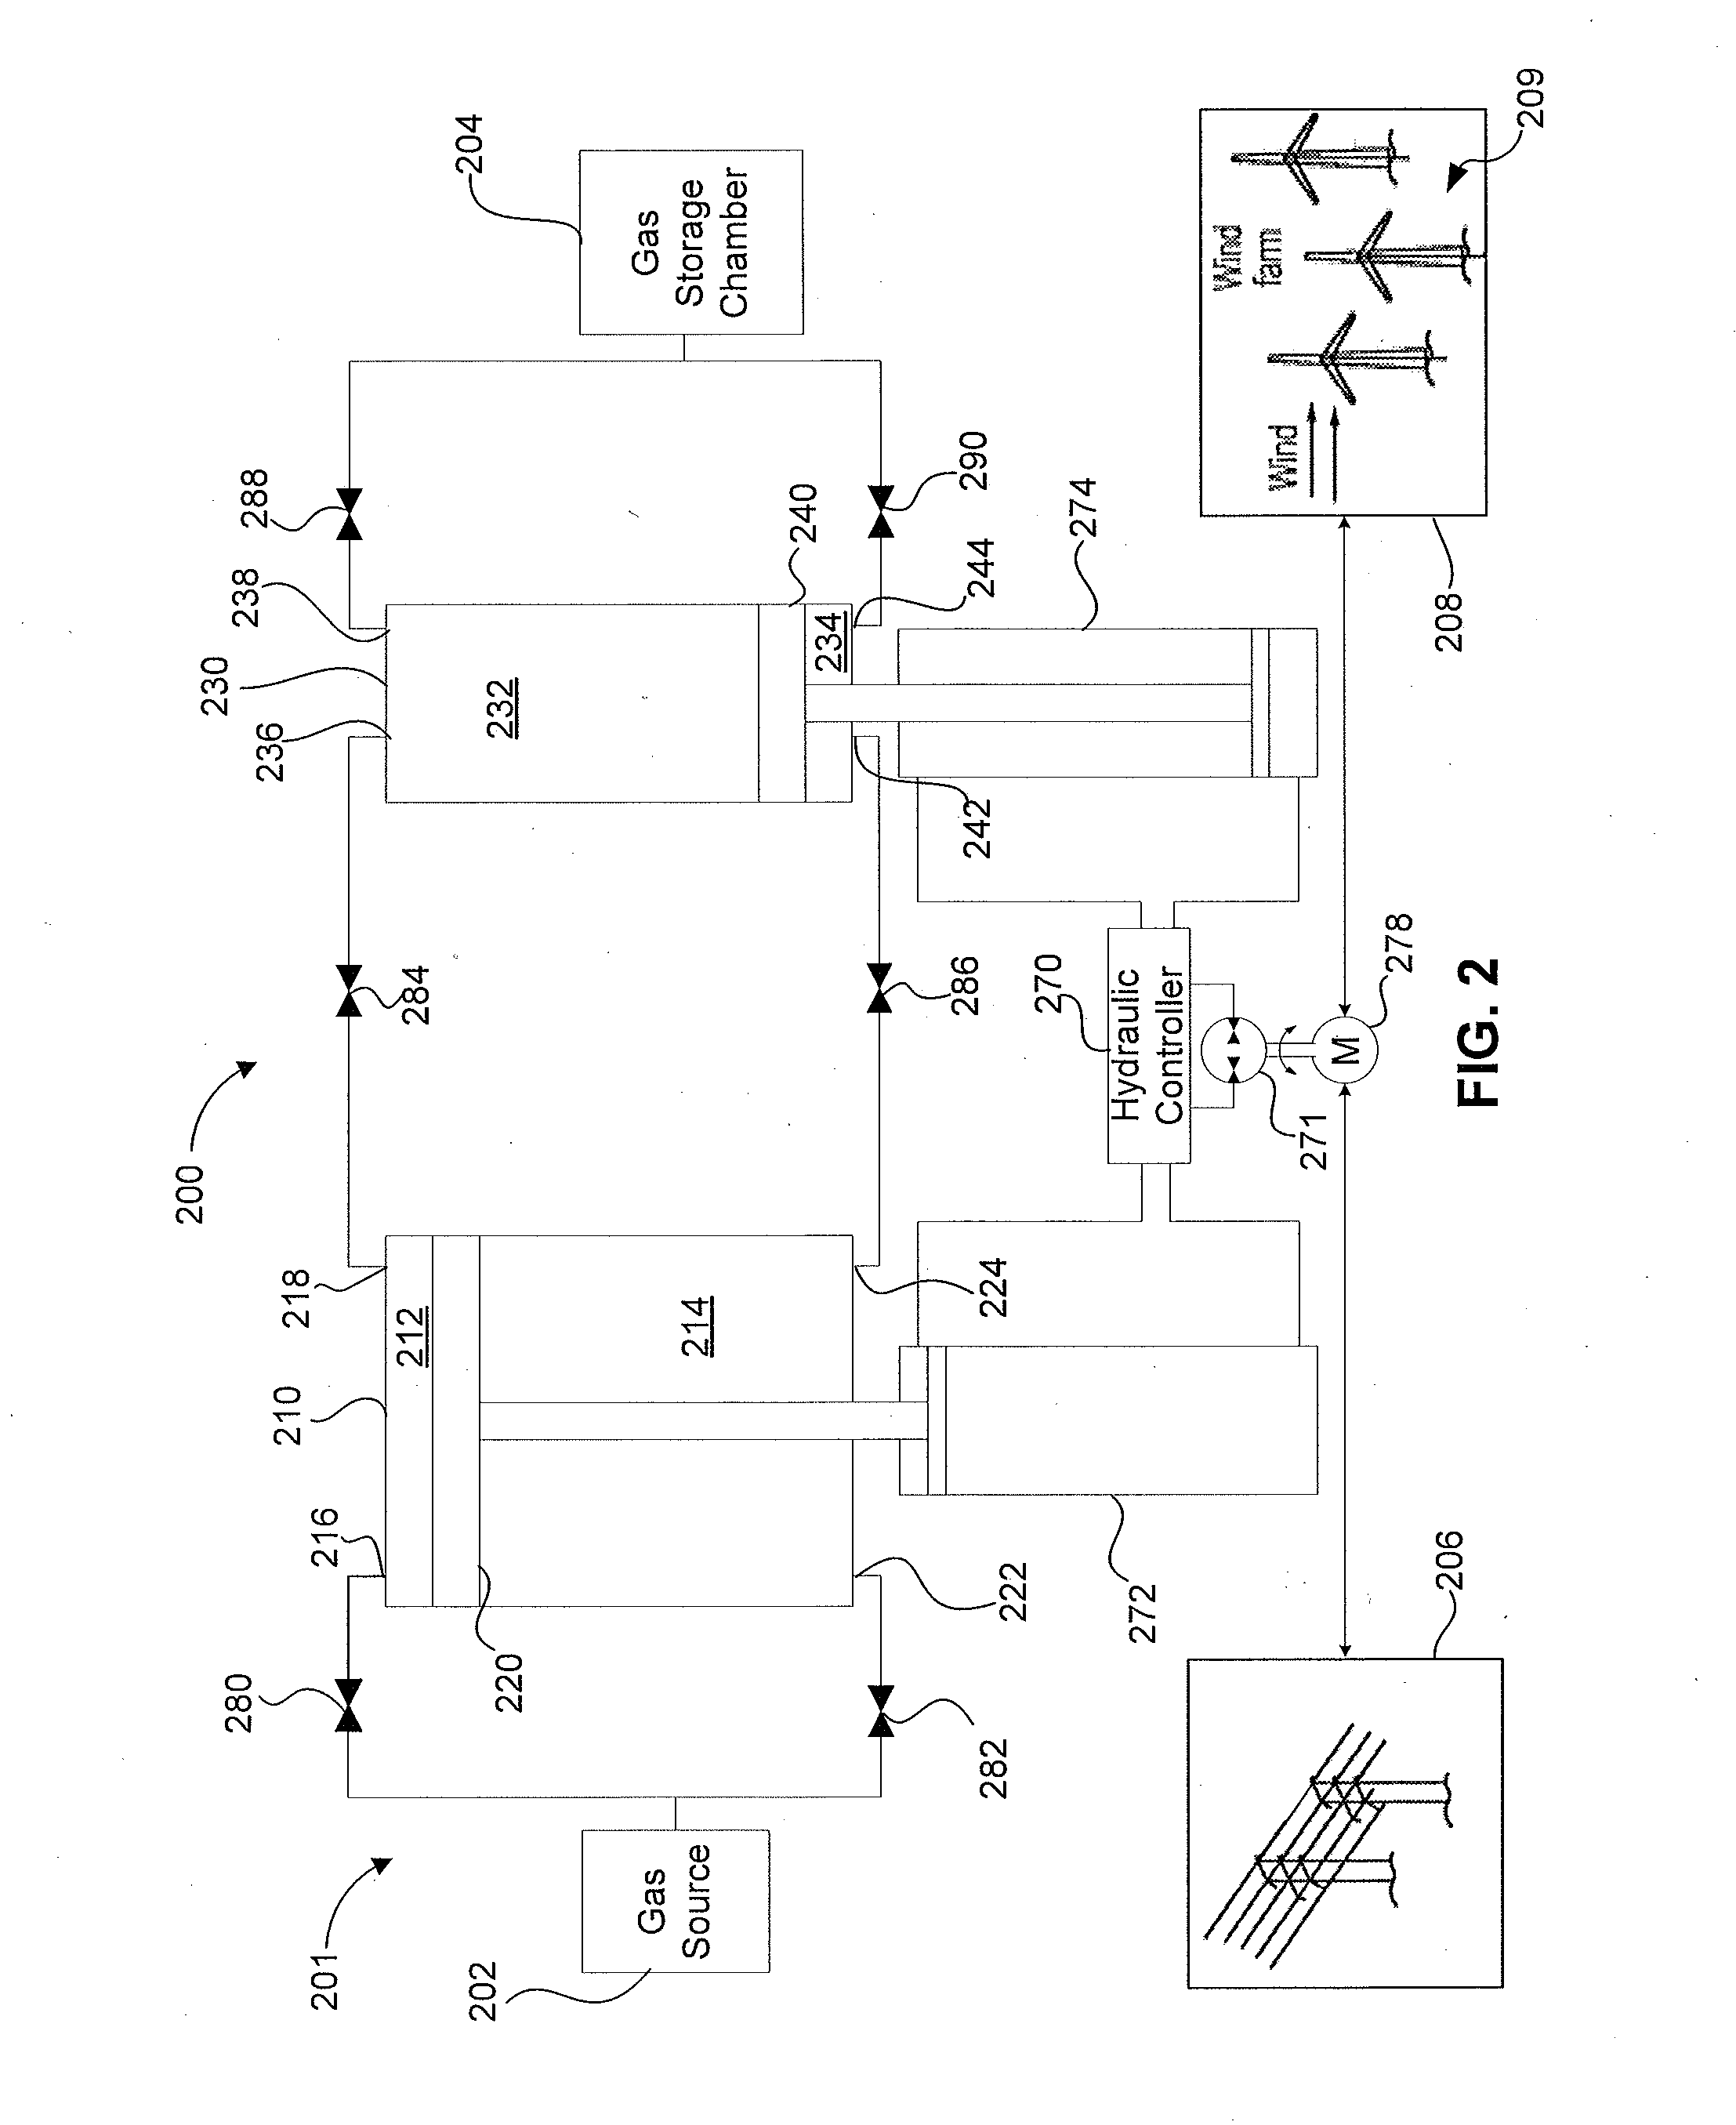 Systems and methods for compressing and/or expanding a gas utilizing a bi-directional piston and hydraulic actuator